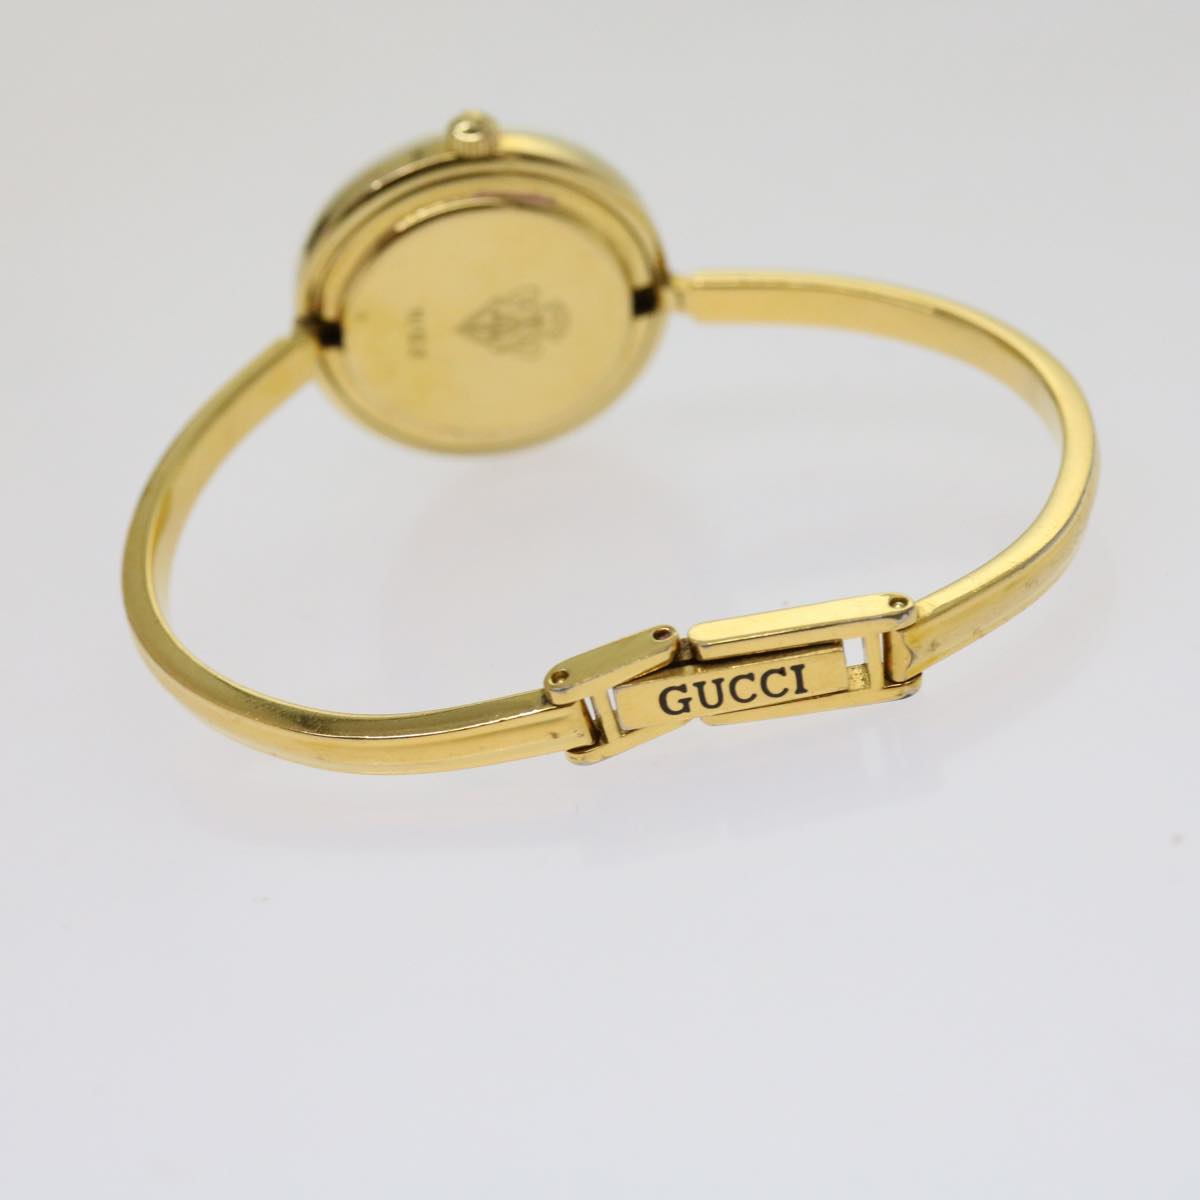 GUCCI Watches Gold Tone White Auth am5459